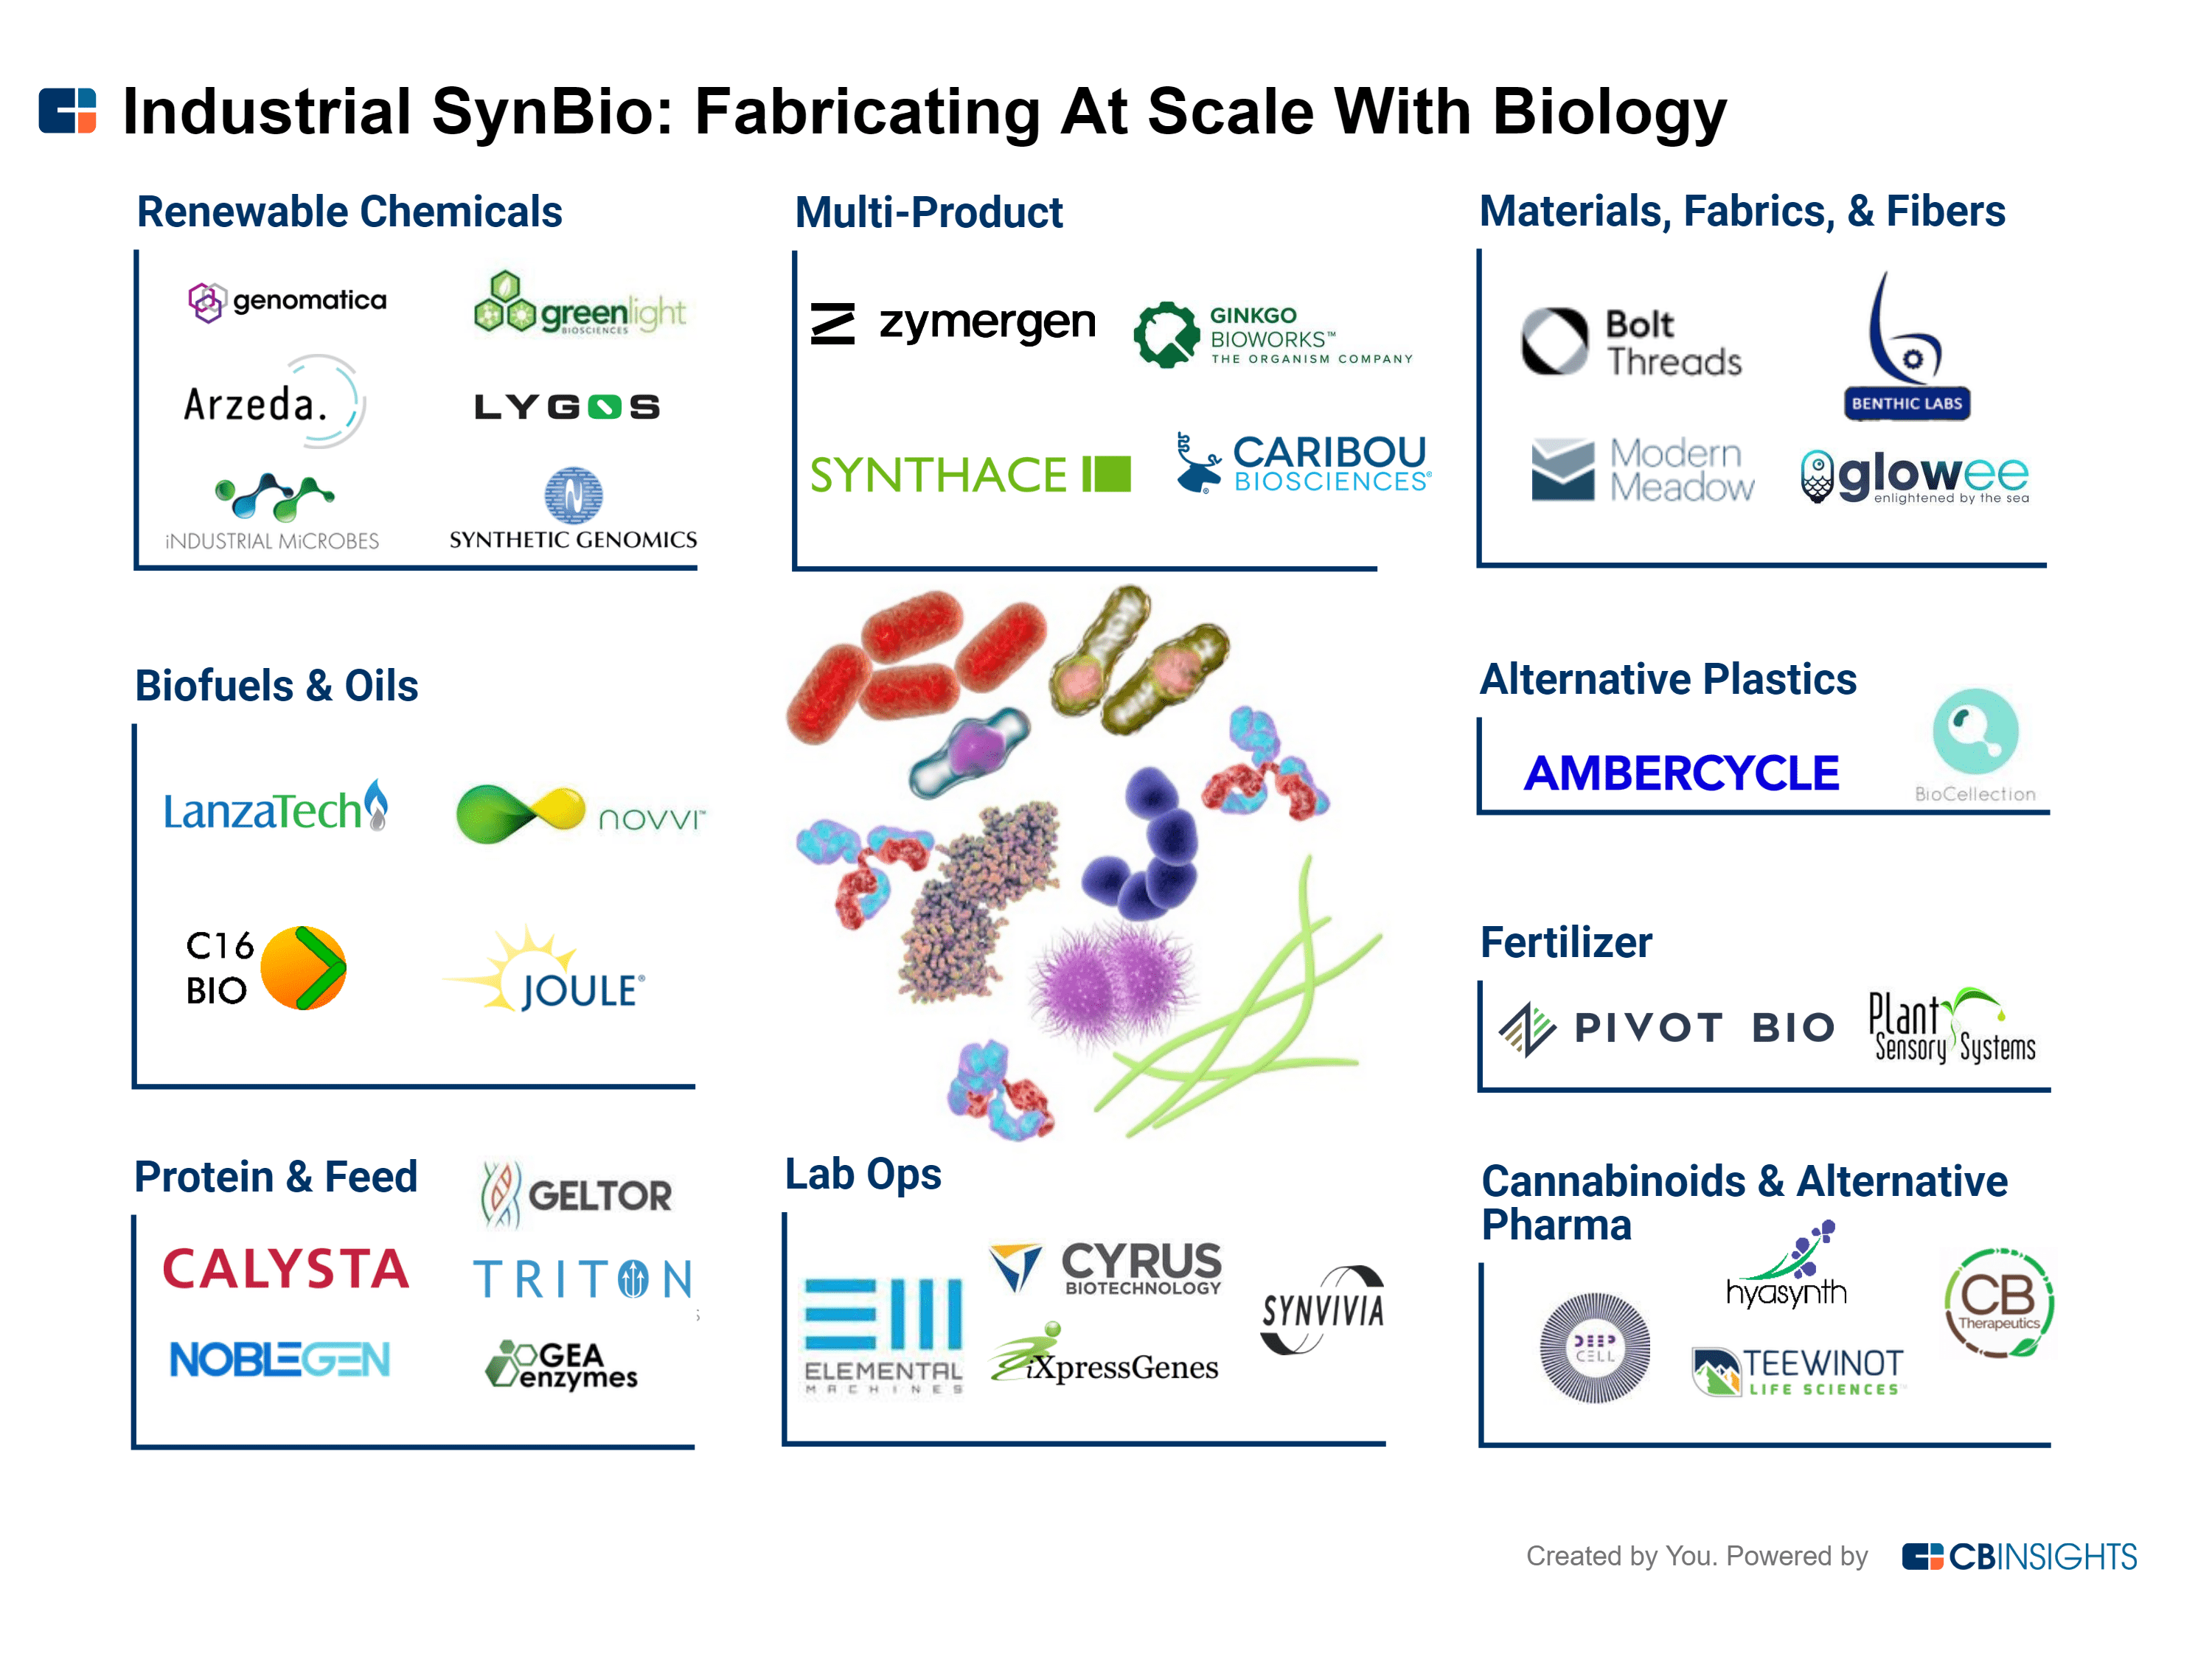 35+ Companies Using Synthetic Biology To Rethink Everything From Plastics To Fabrics To Fertilizers - CB Insights Research